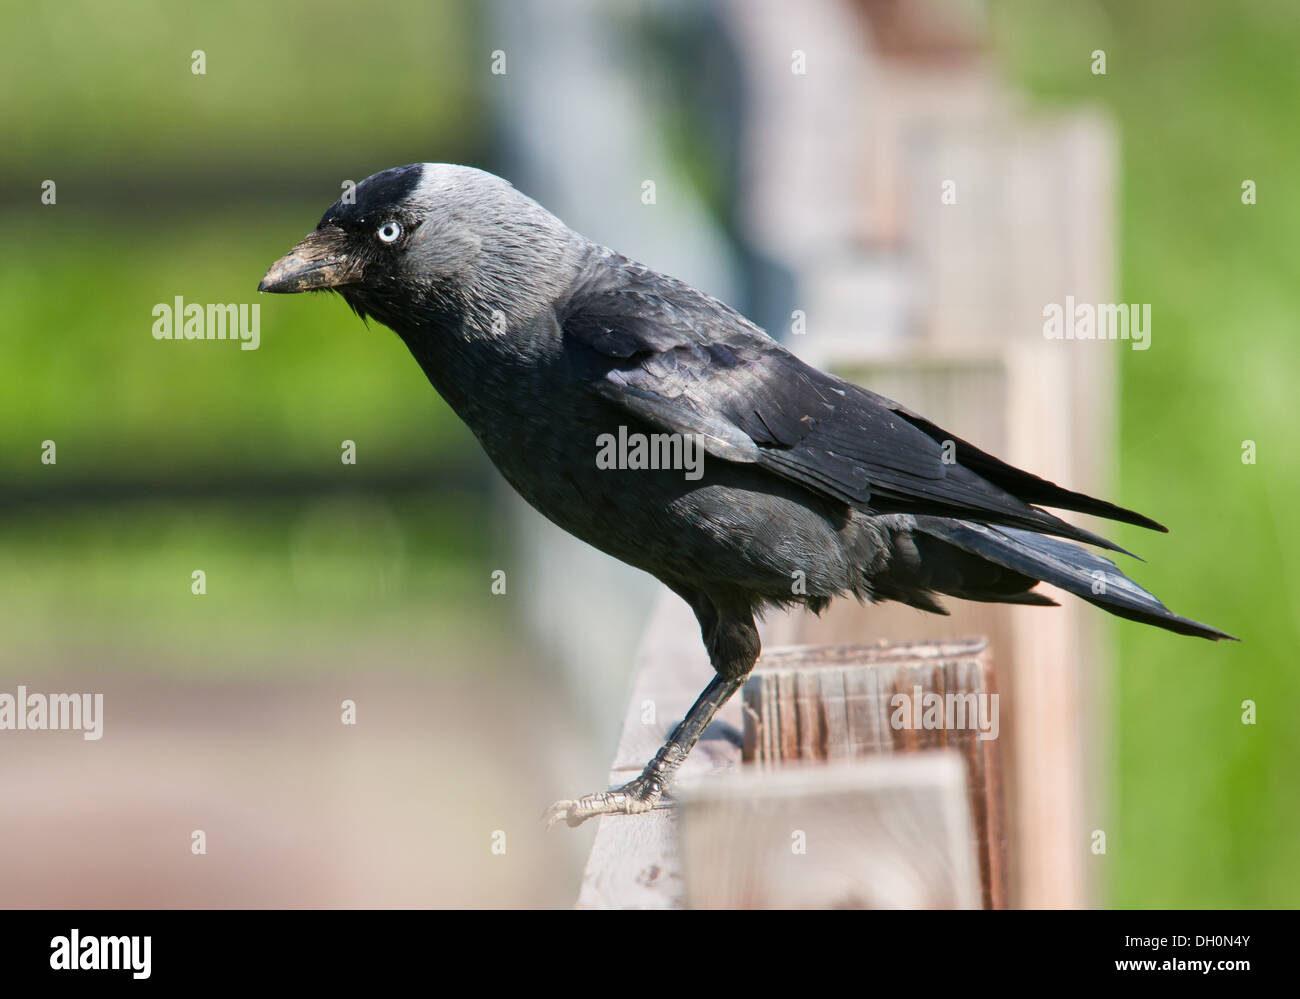 Plate 60 - Jackdaws, Rooks, Crows and Ravens - A Field Guide to